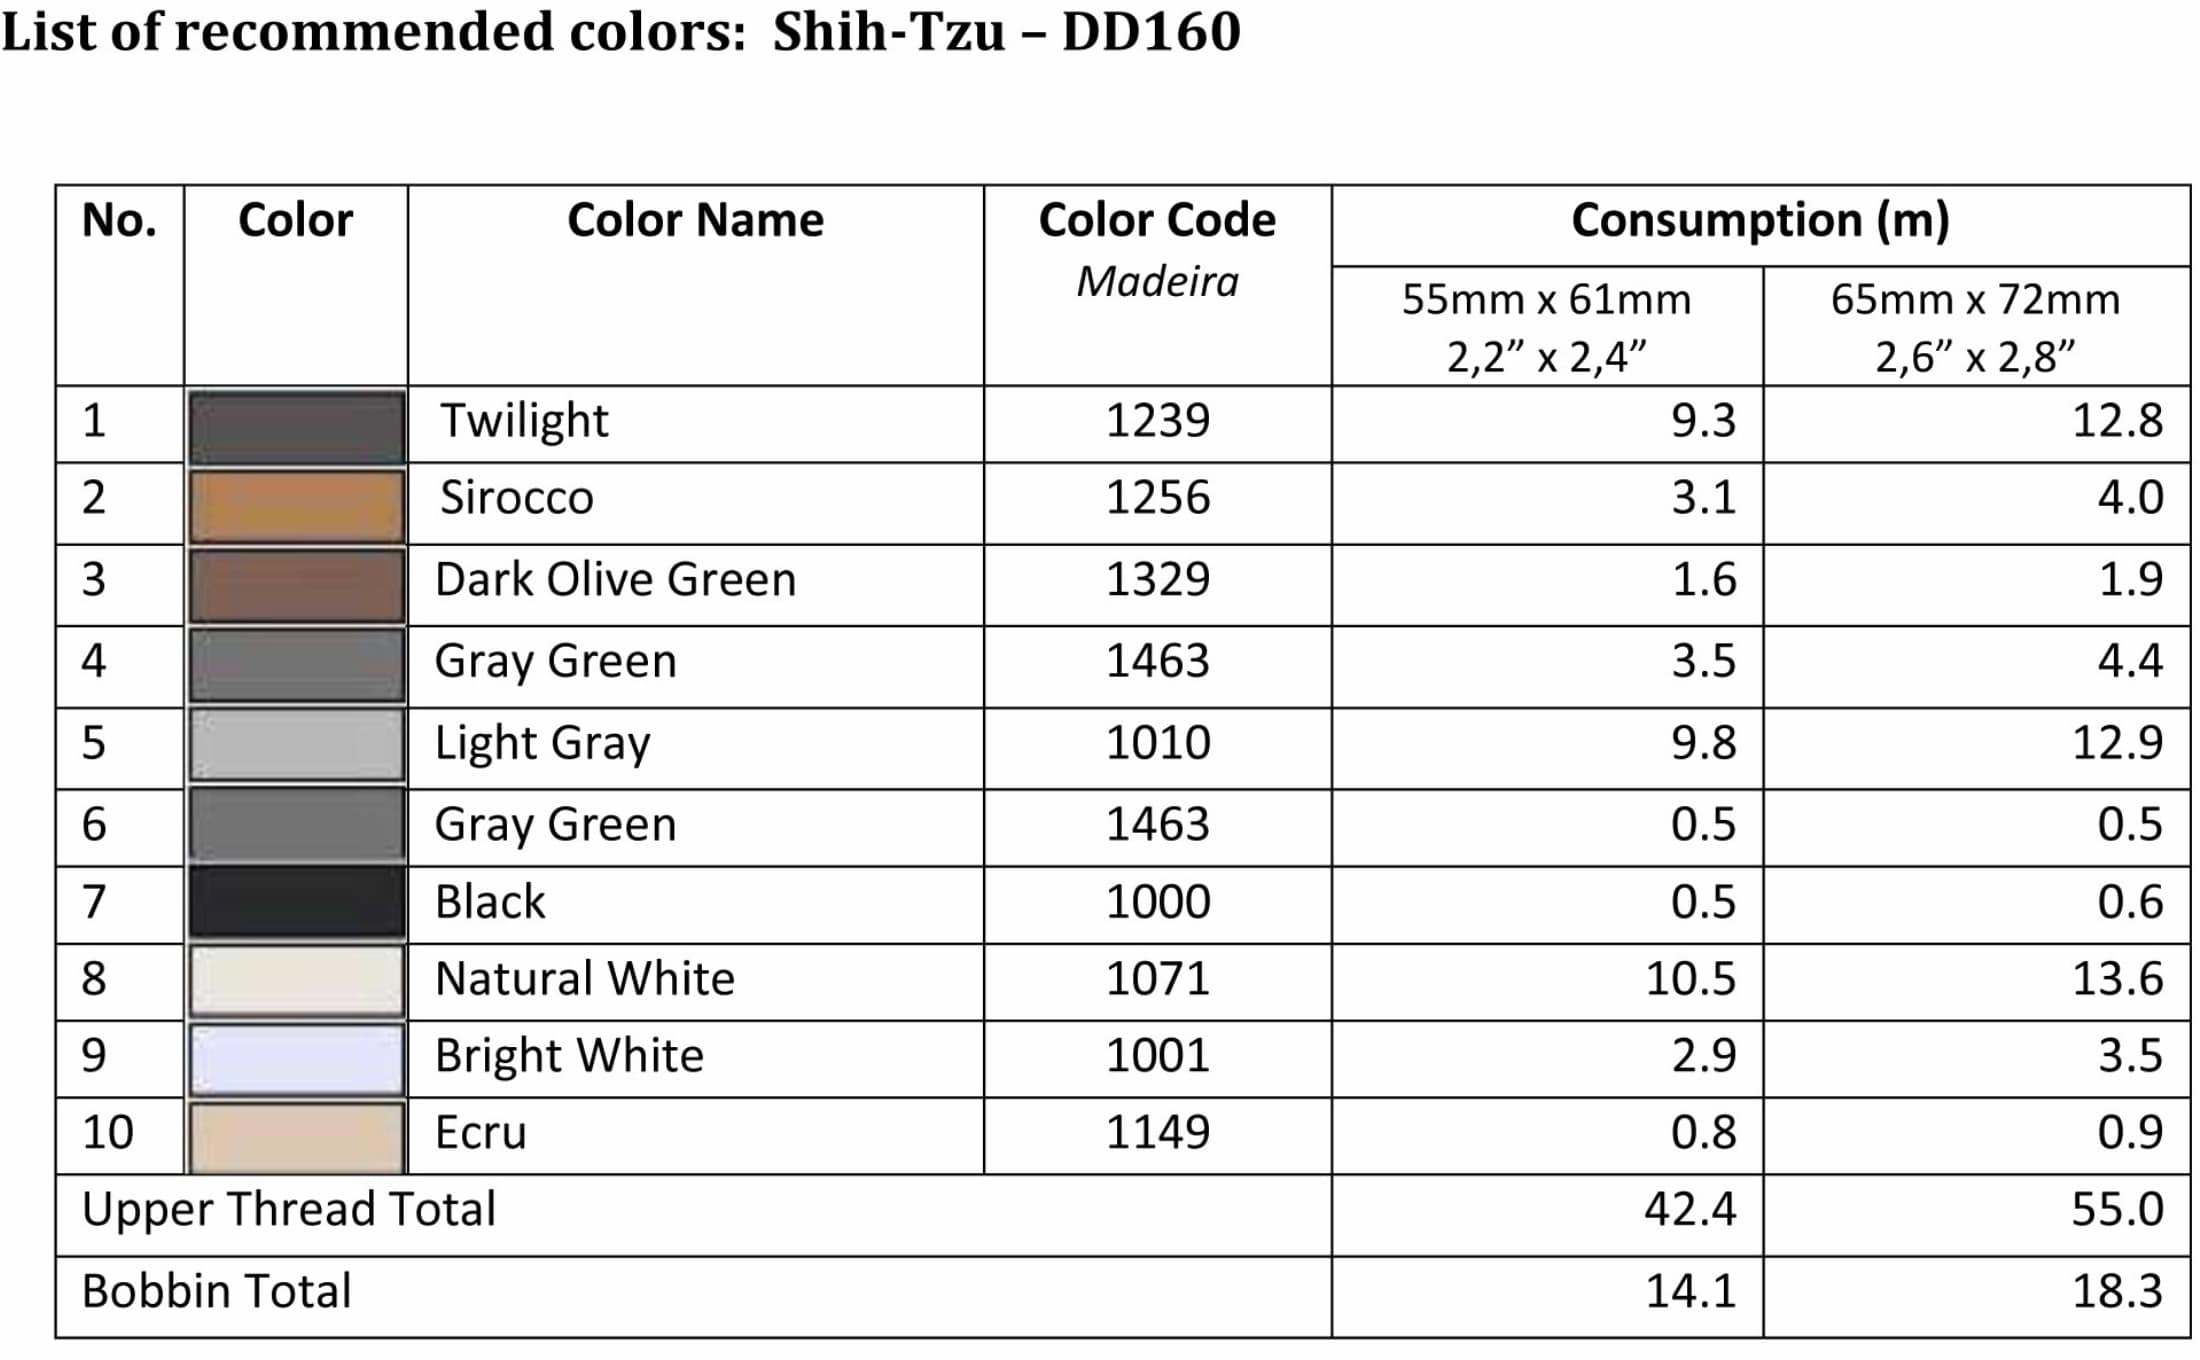 List of recommended colors - DD160